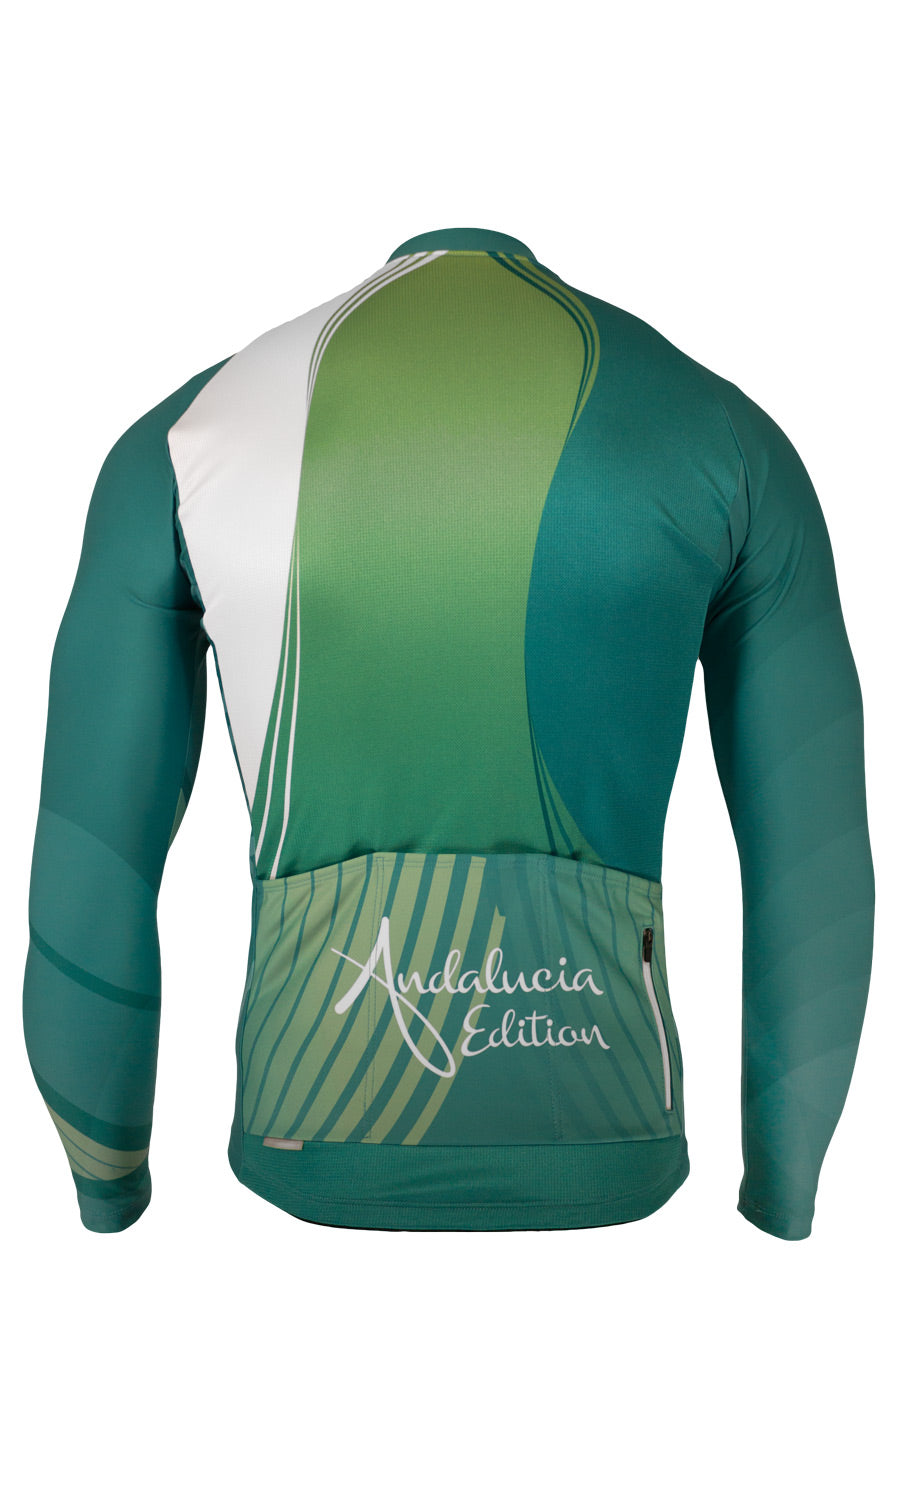 Long Jersey ANDALUCIA EDITION